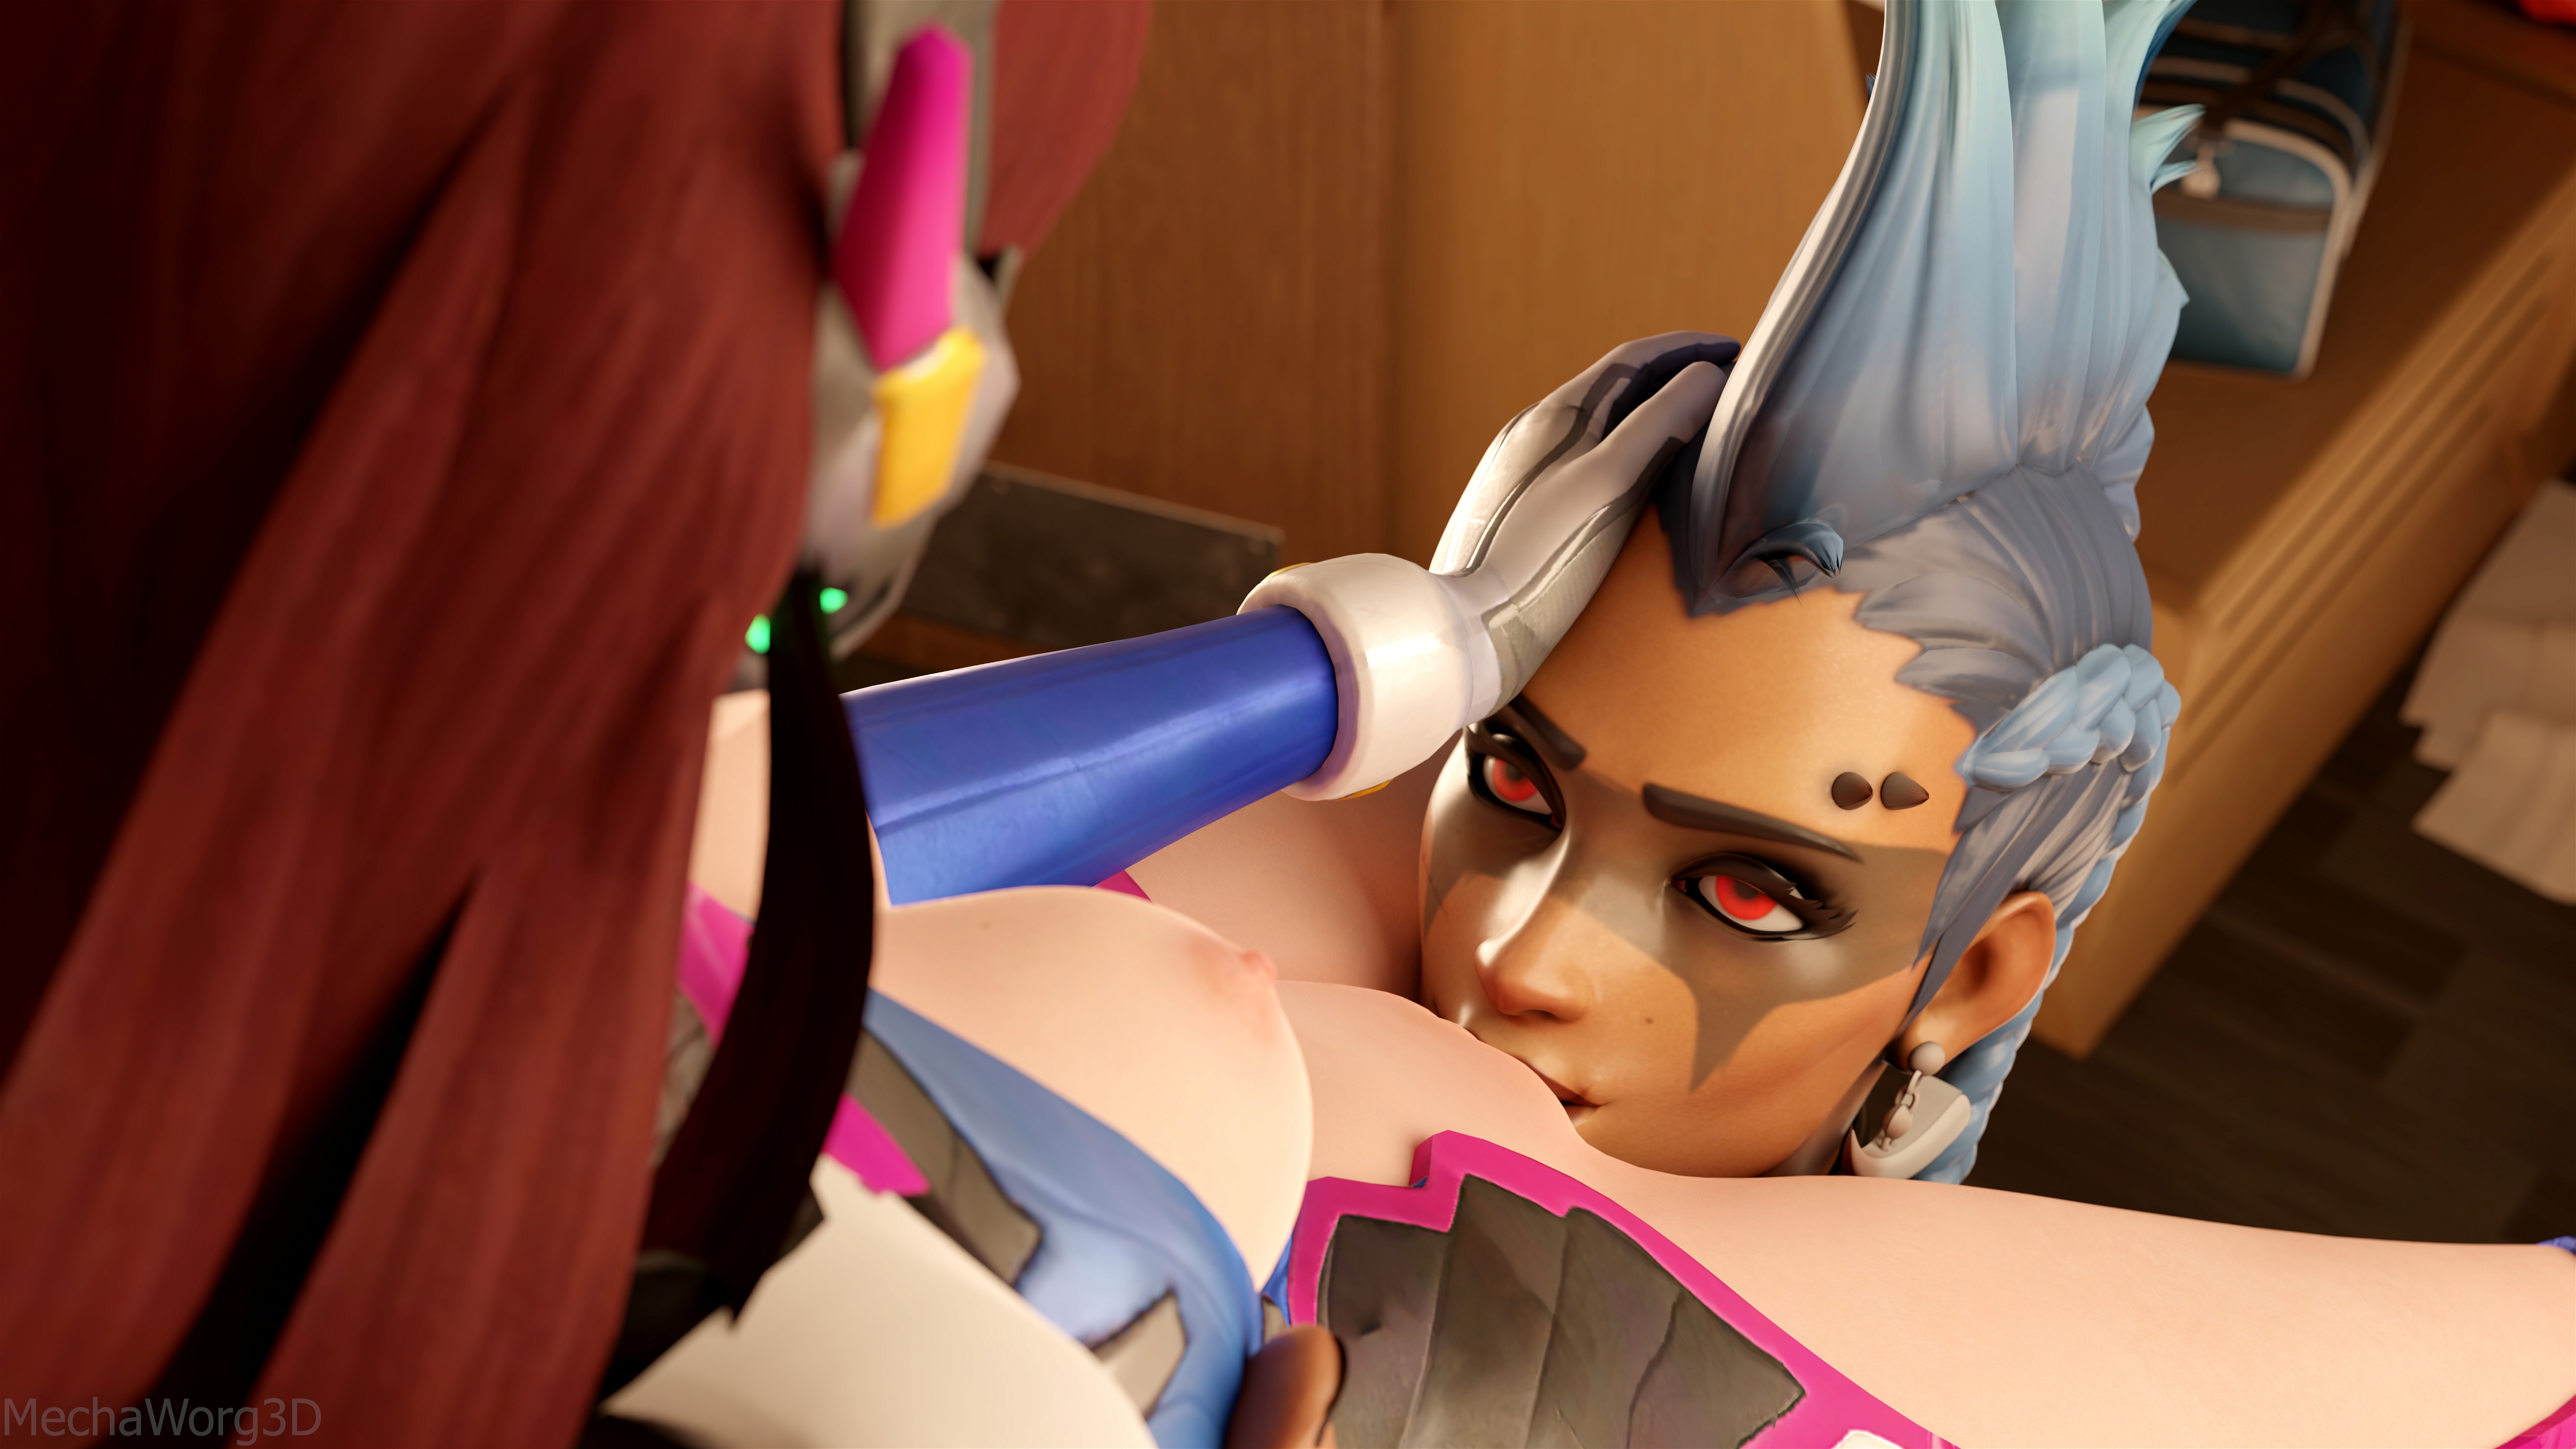 Junker Queens new plaything  part 2 Overwatch Dva (overwatch) Junkerqueen Cunnilingus Size Difference 2girls Largerfemale Carry Muscular Girl Muscles Huge Boobs Bodysuit Breasts Pink Nipples 2